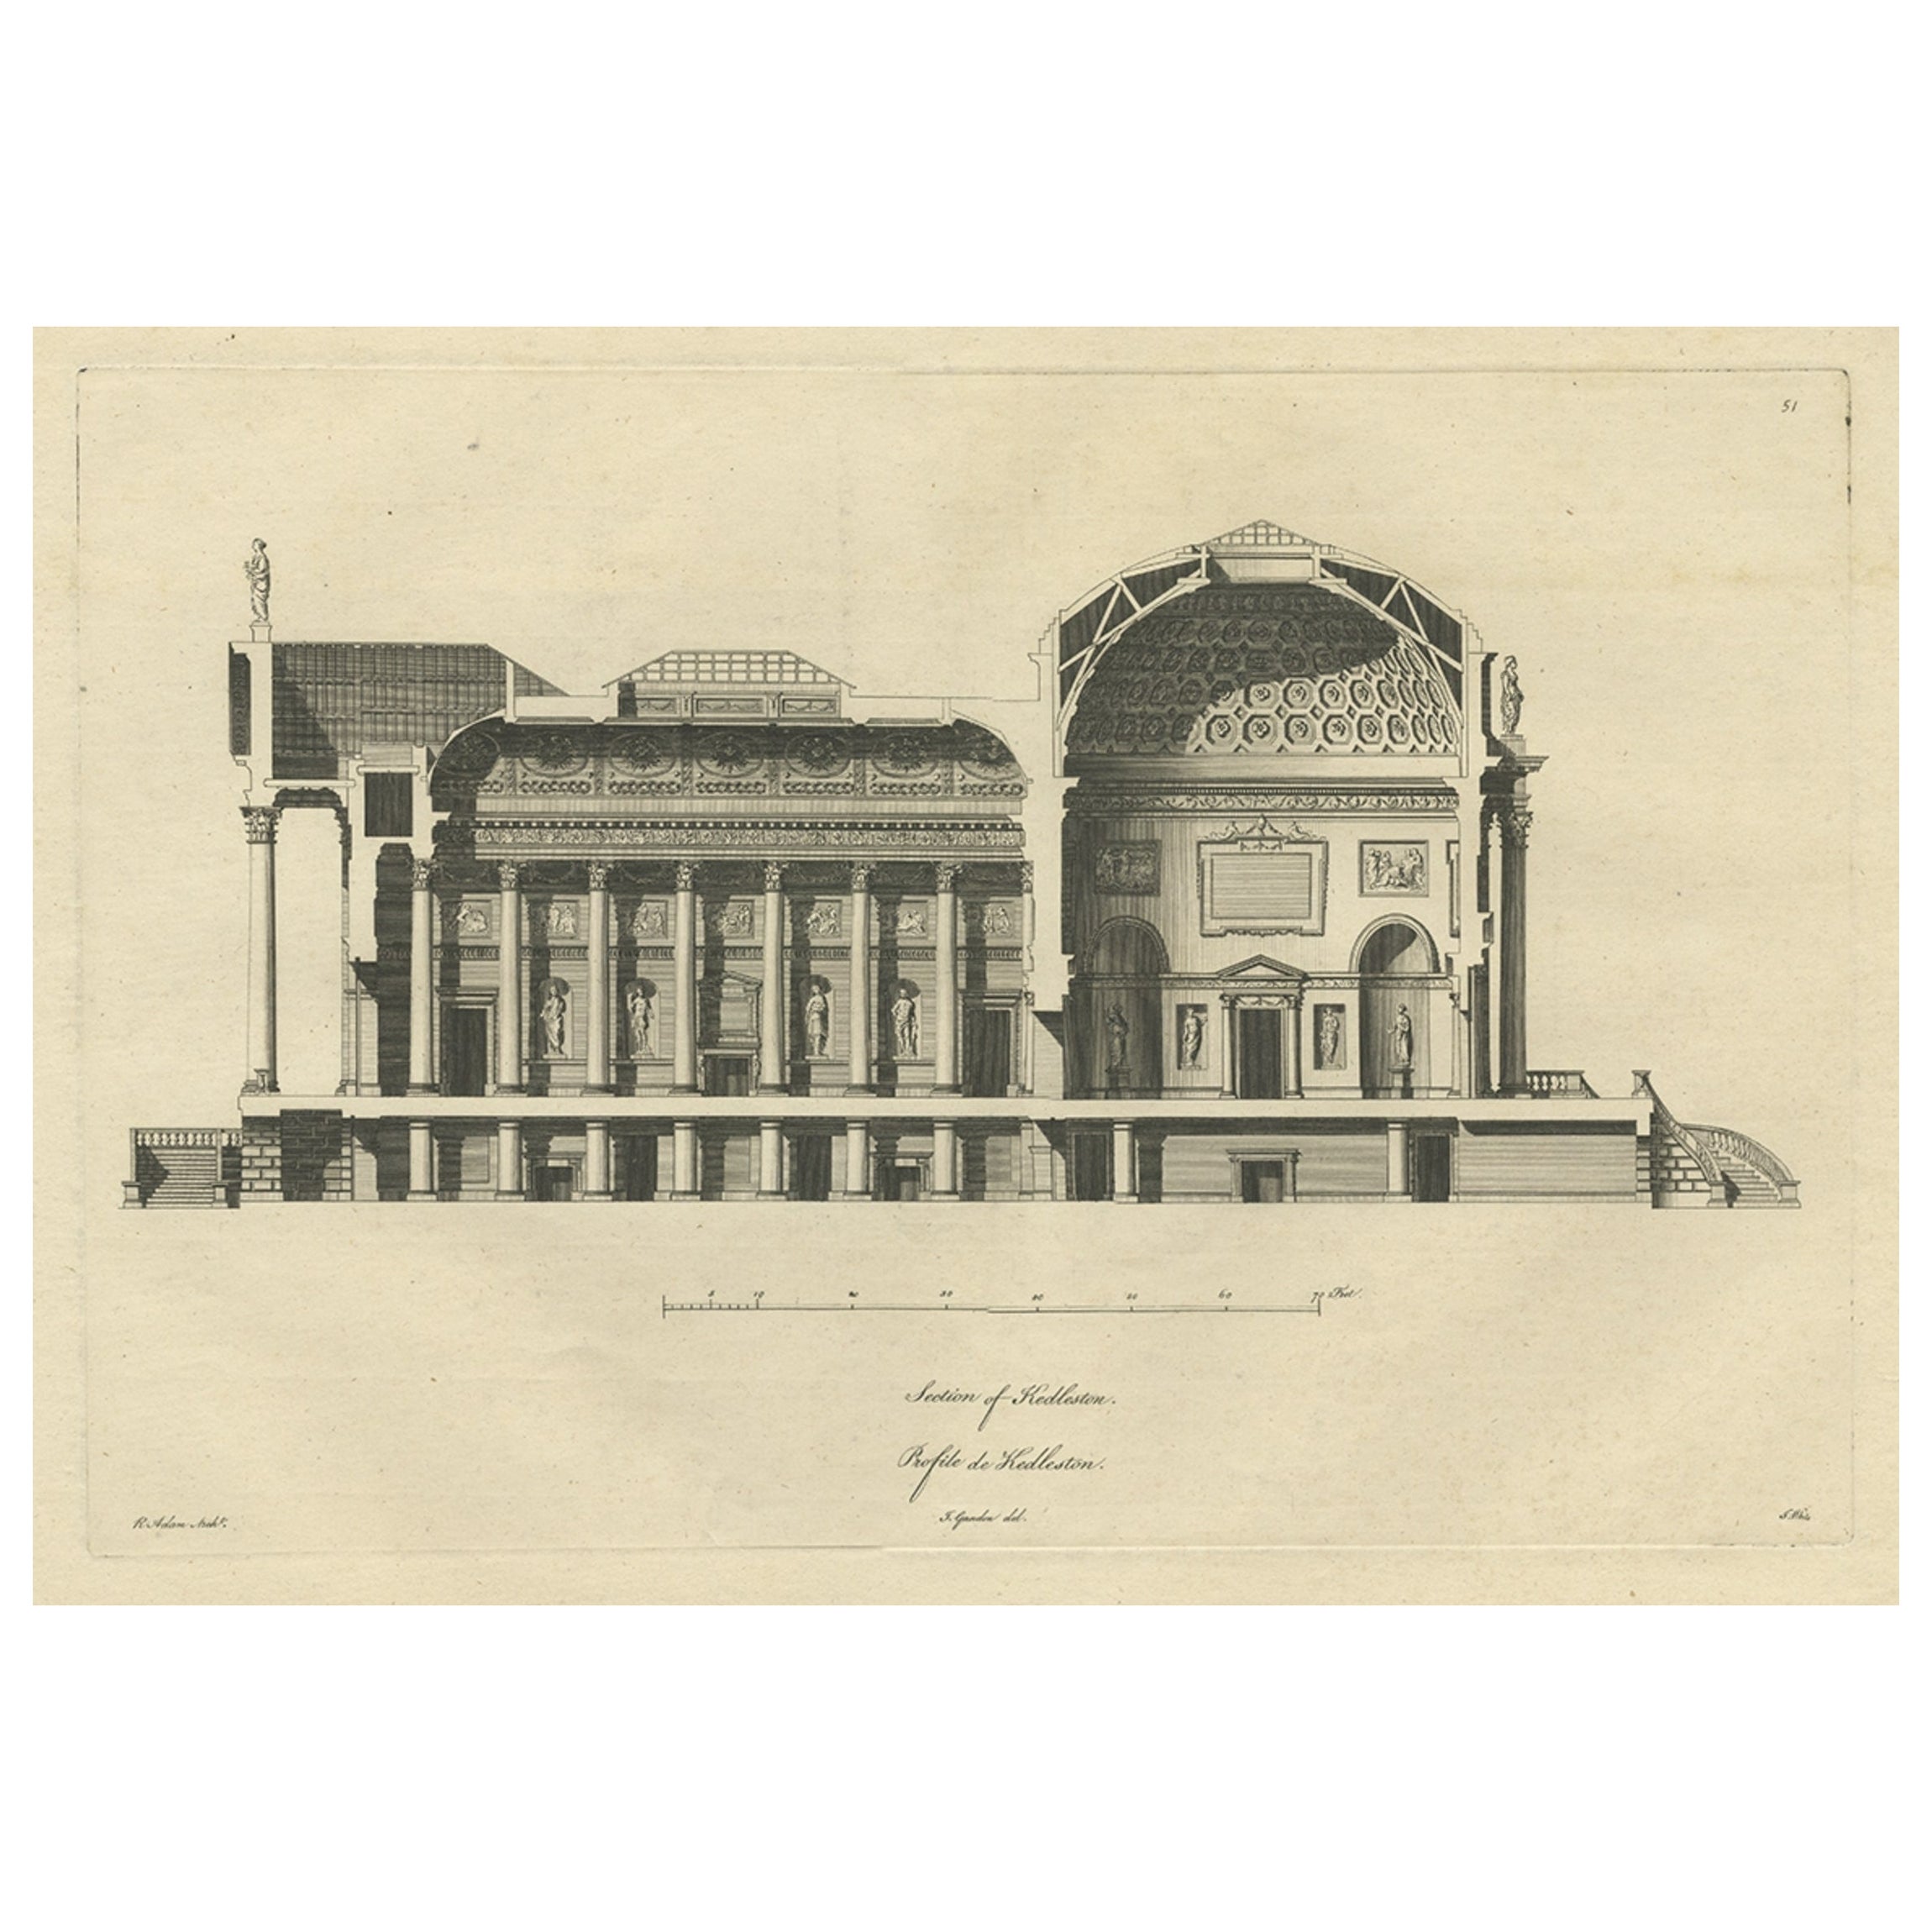 Antique Print of a Section of Kedleston Hall, Derbyshire, England, c.1770